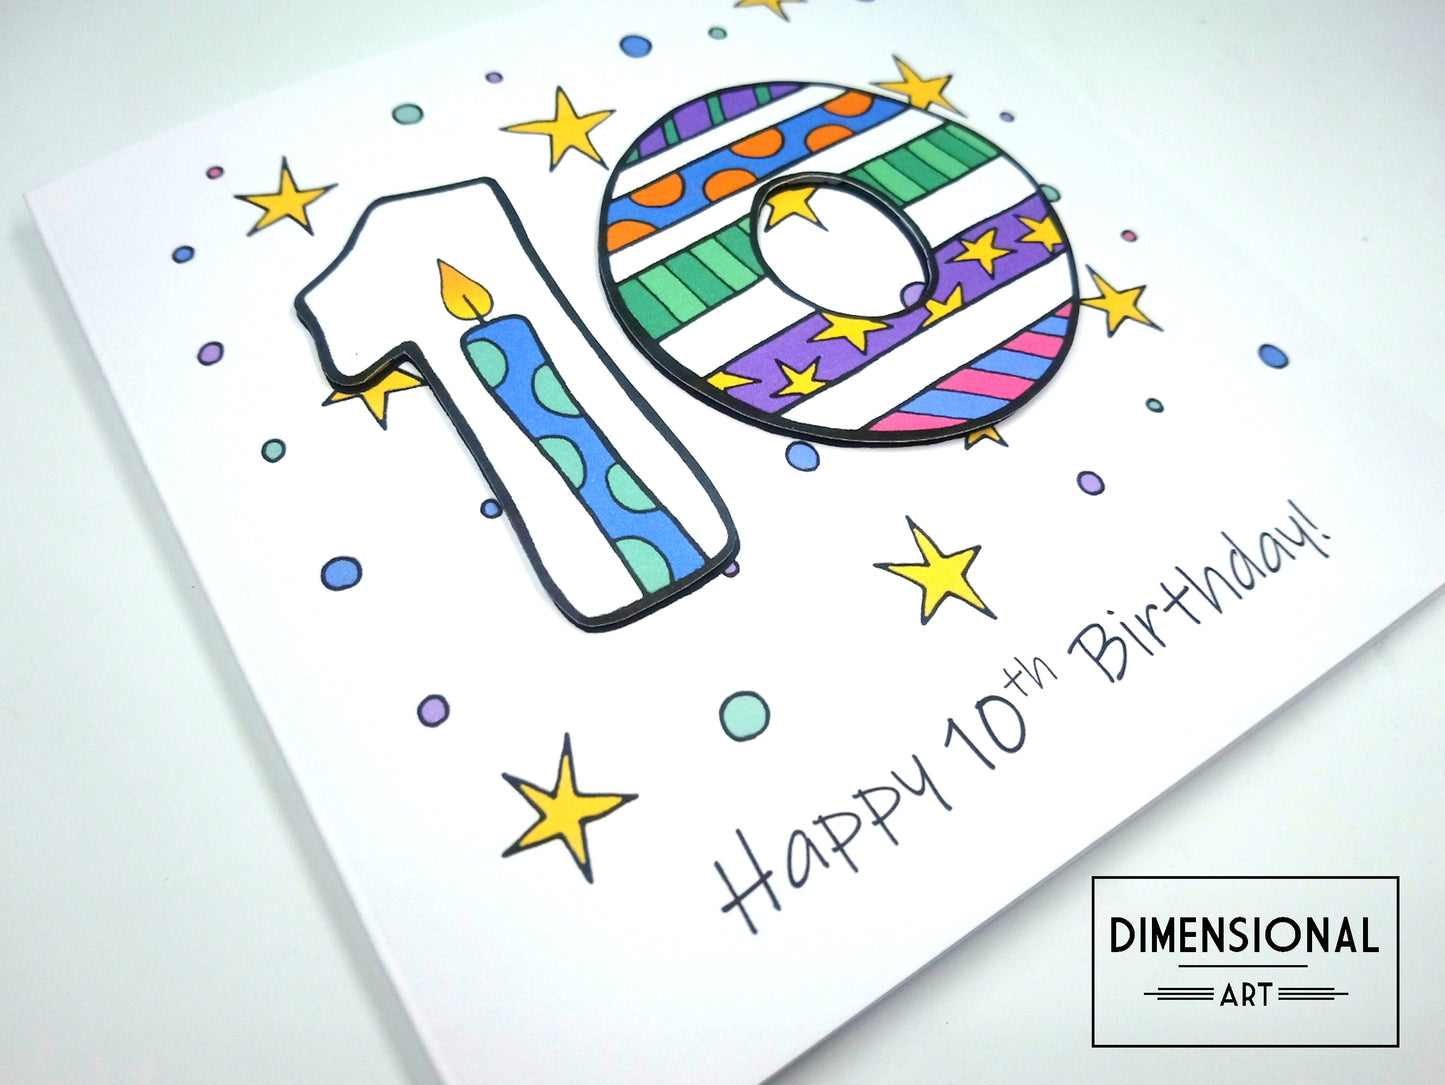 10th Number Candles Birthday Card